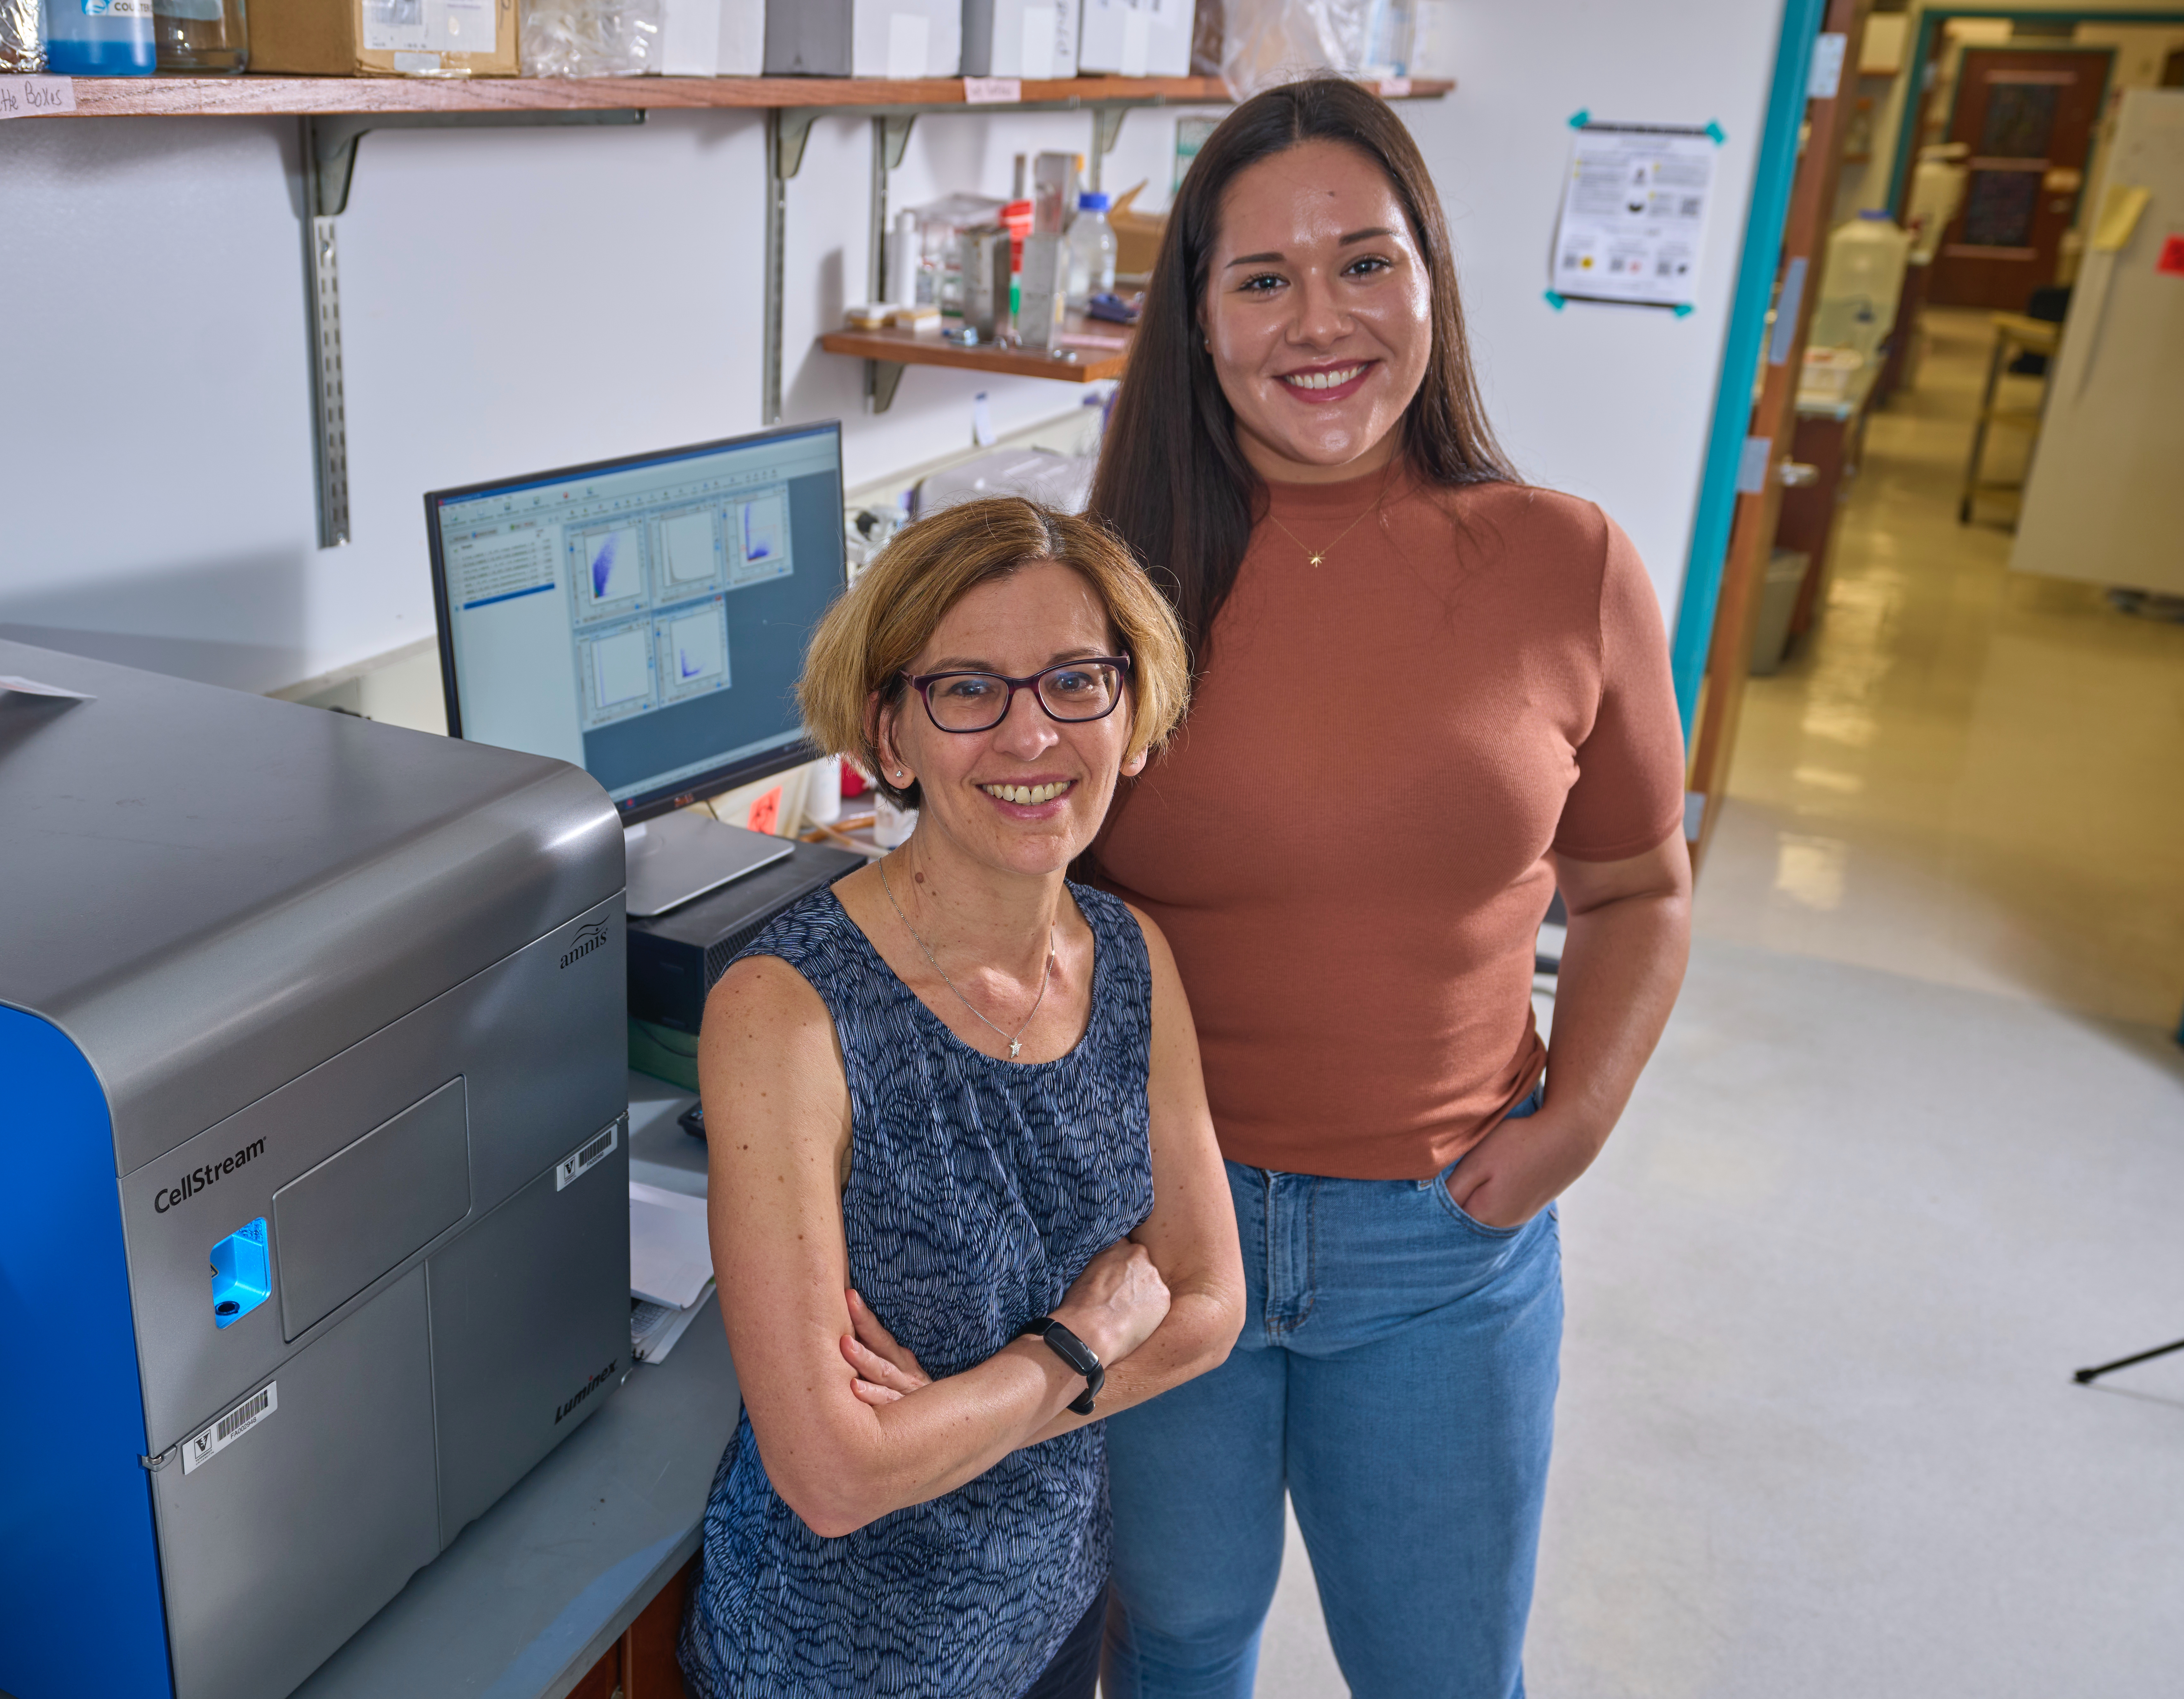 Alissa Weaver and Ariana von Lersner standing in front of a piece of lab equipment and a computer.